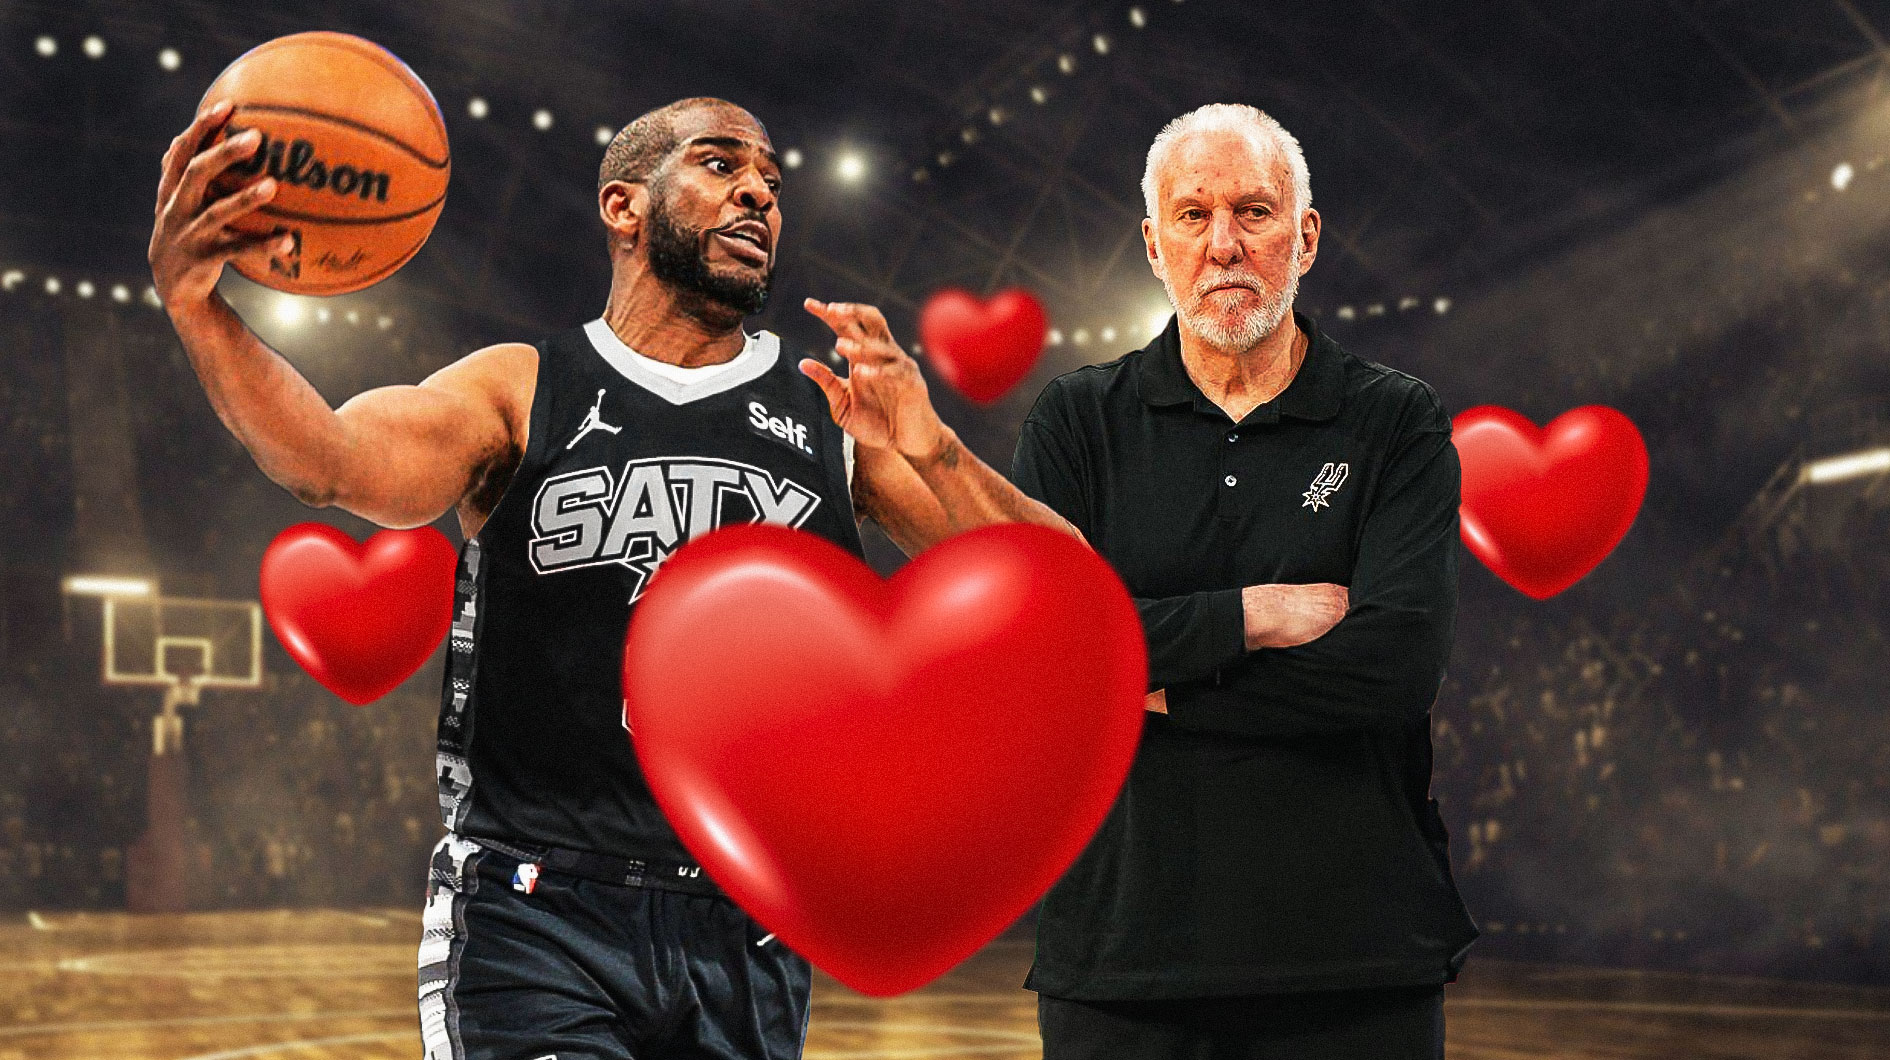 Chris Paul breaks his silence about his move to Gregg Popovich’s Spurs